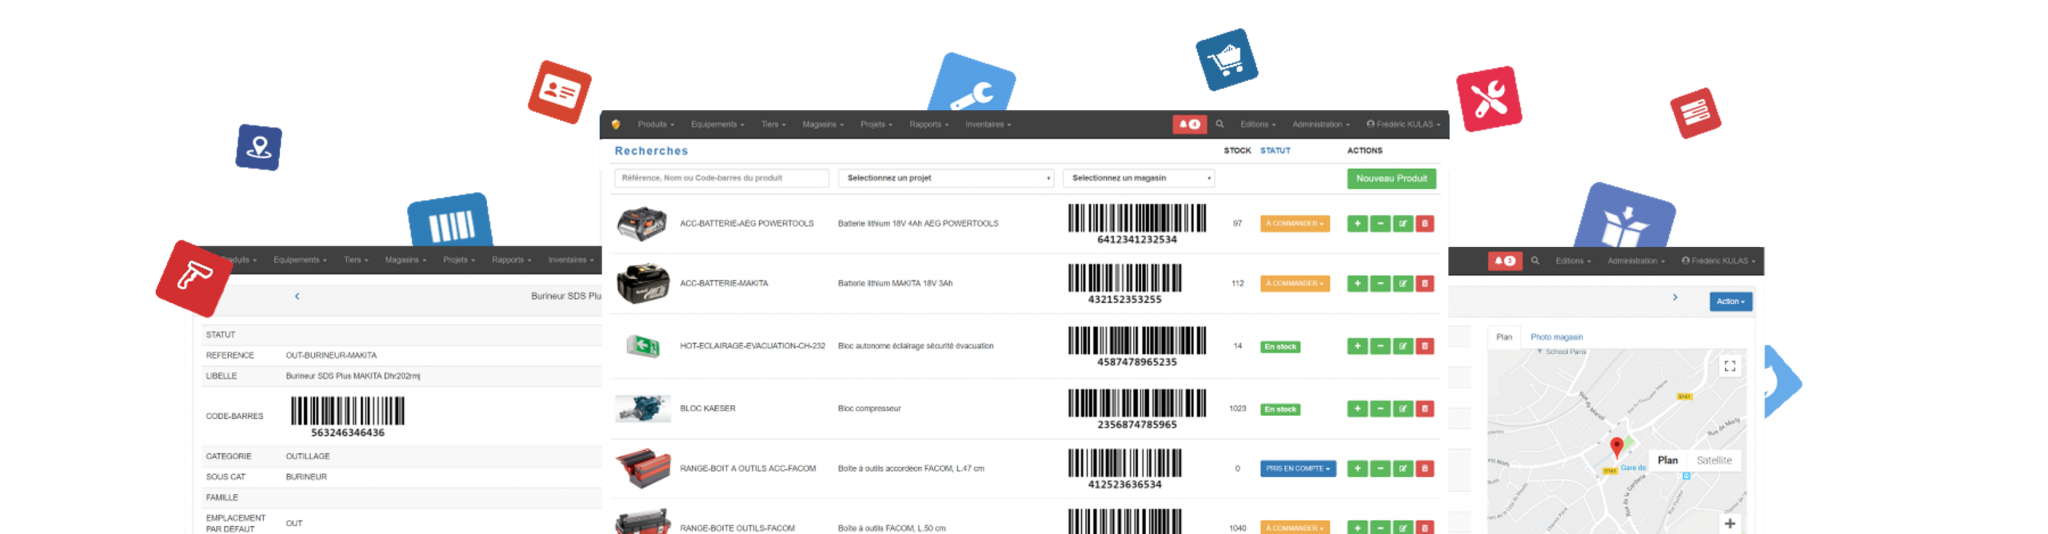 Review GSE-Web (Gestion de stock): Inventory management on PC and smartphone - Appvizer